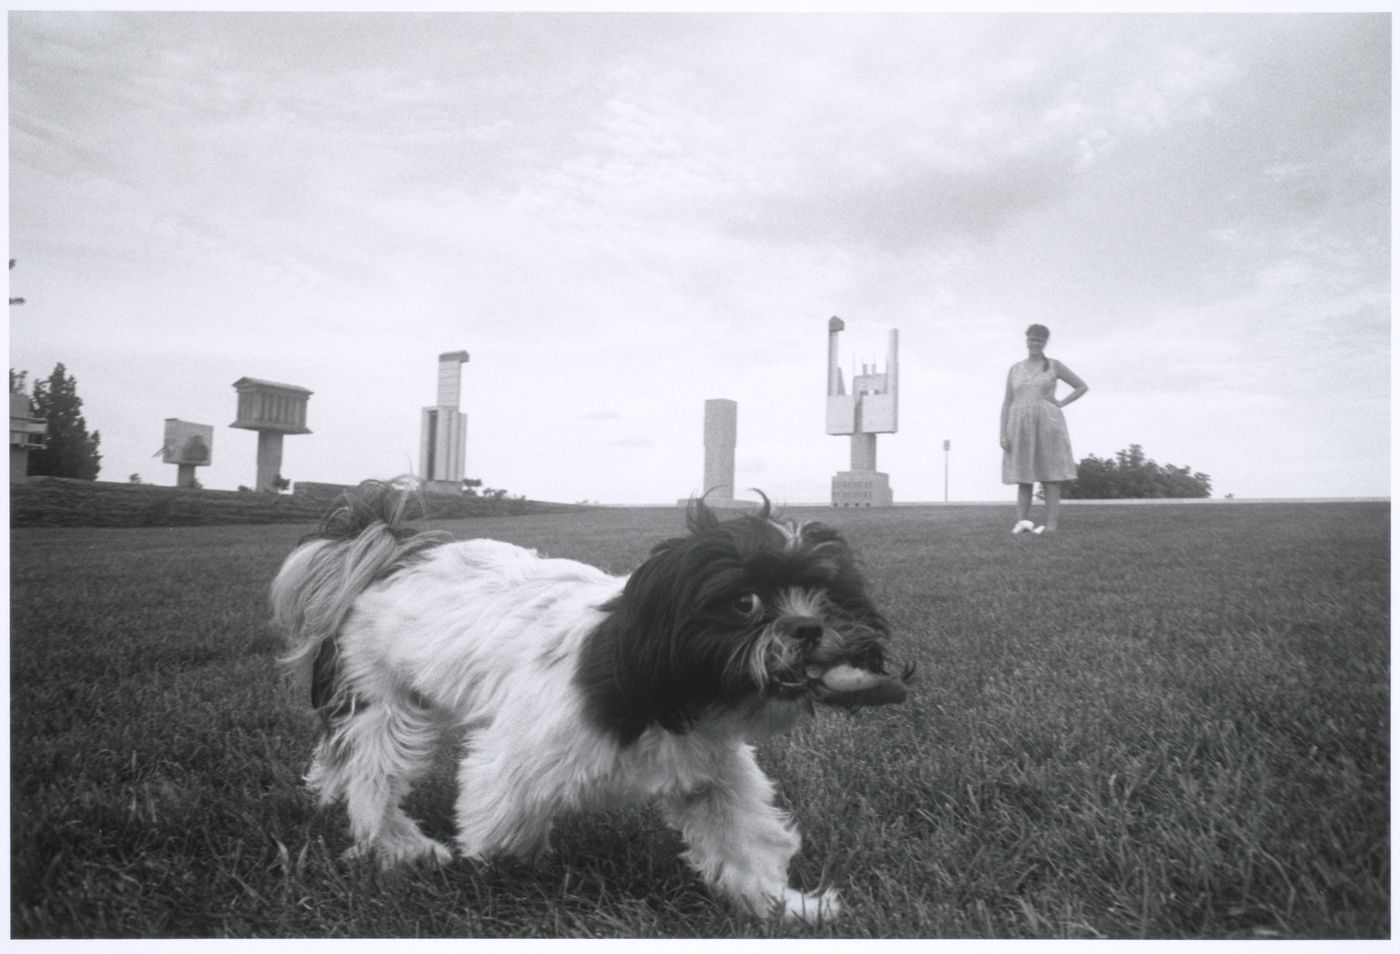 View of a Shih Tzu dog in the meadow with the allegorical columns in the background, CCA garden, Montréal, Québec, Canada